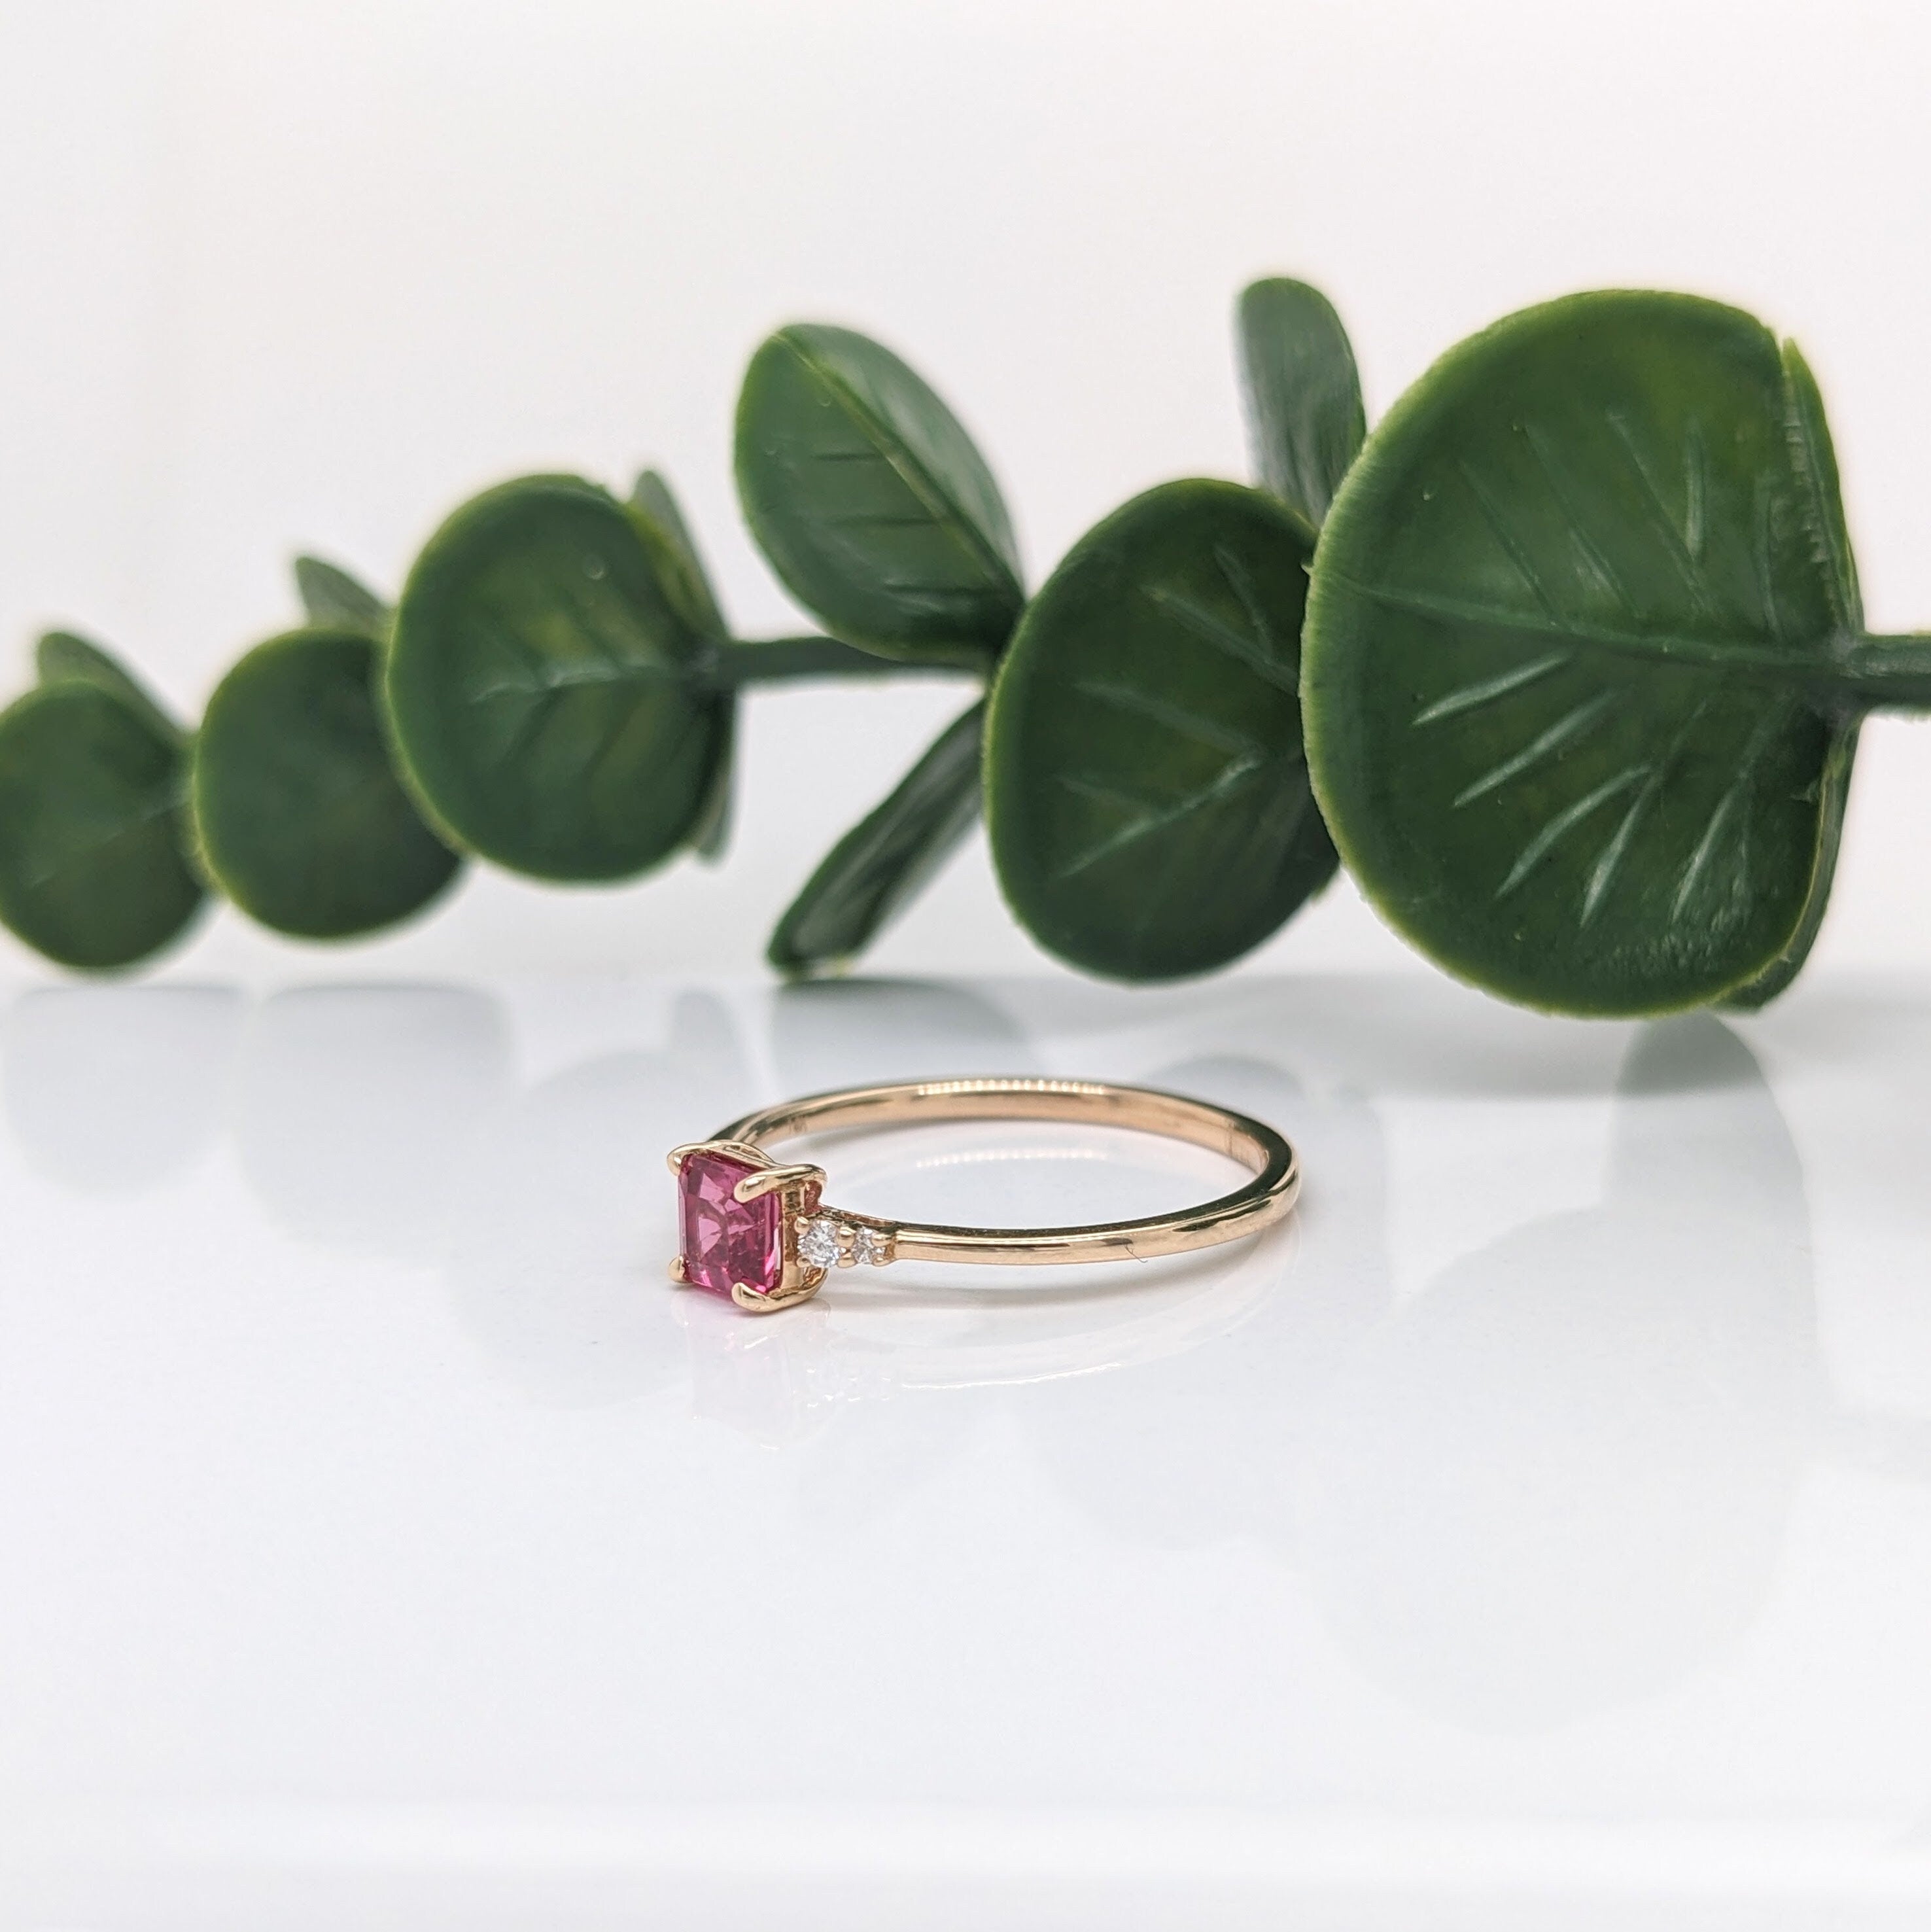 Dainty Princess Cut Red Spinel Ring in Solid 14K Yellow Gold with Natural Diamond Accents | 4mm | October Birthstone | Prongs | Daily Wear